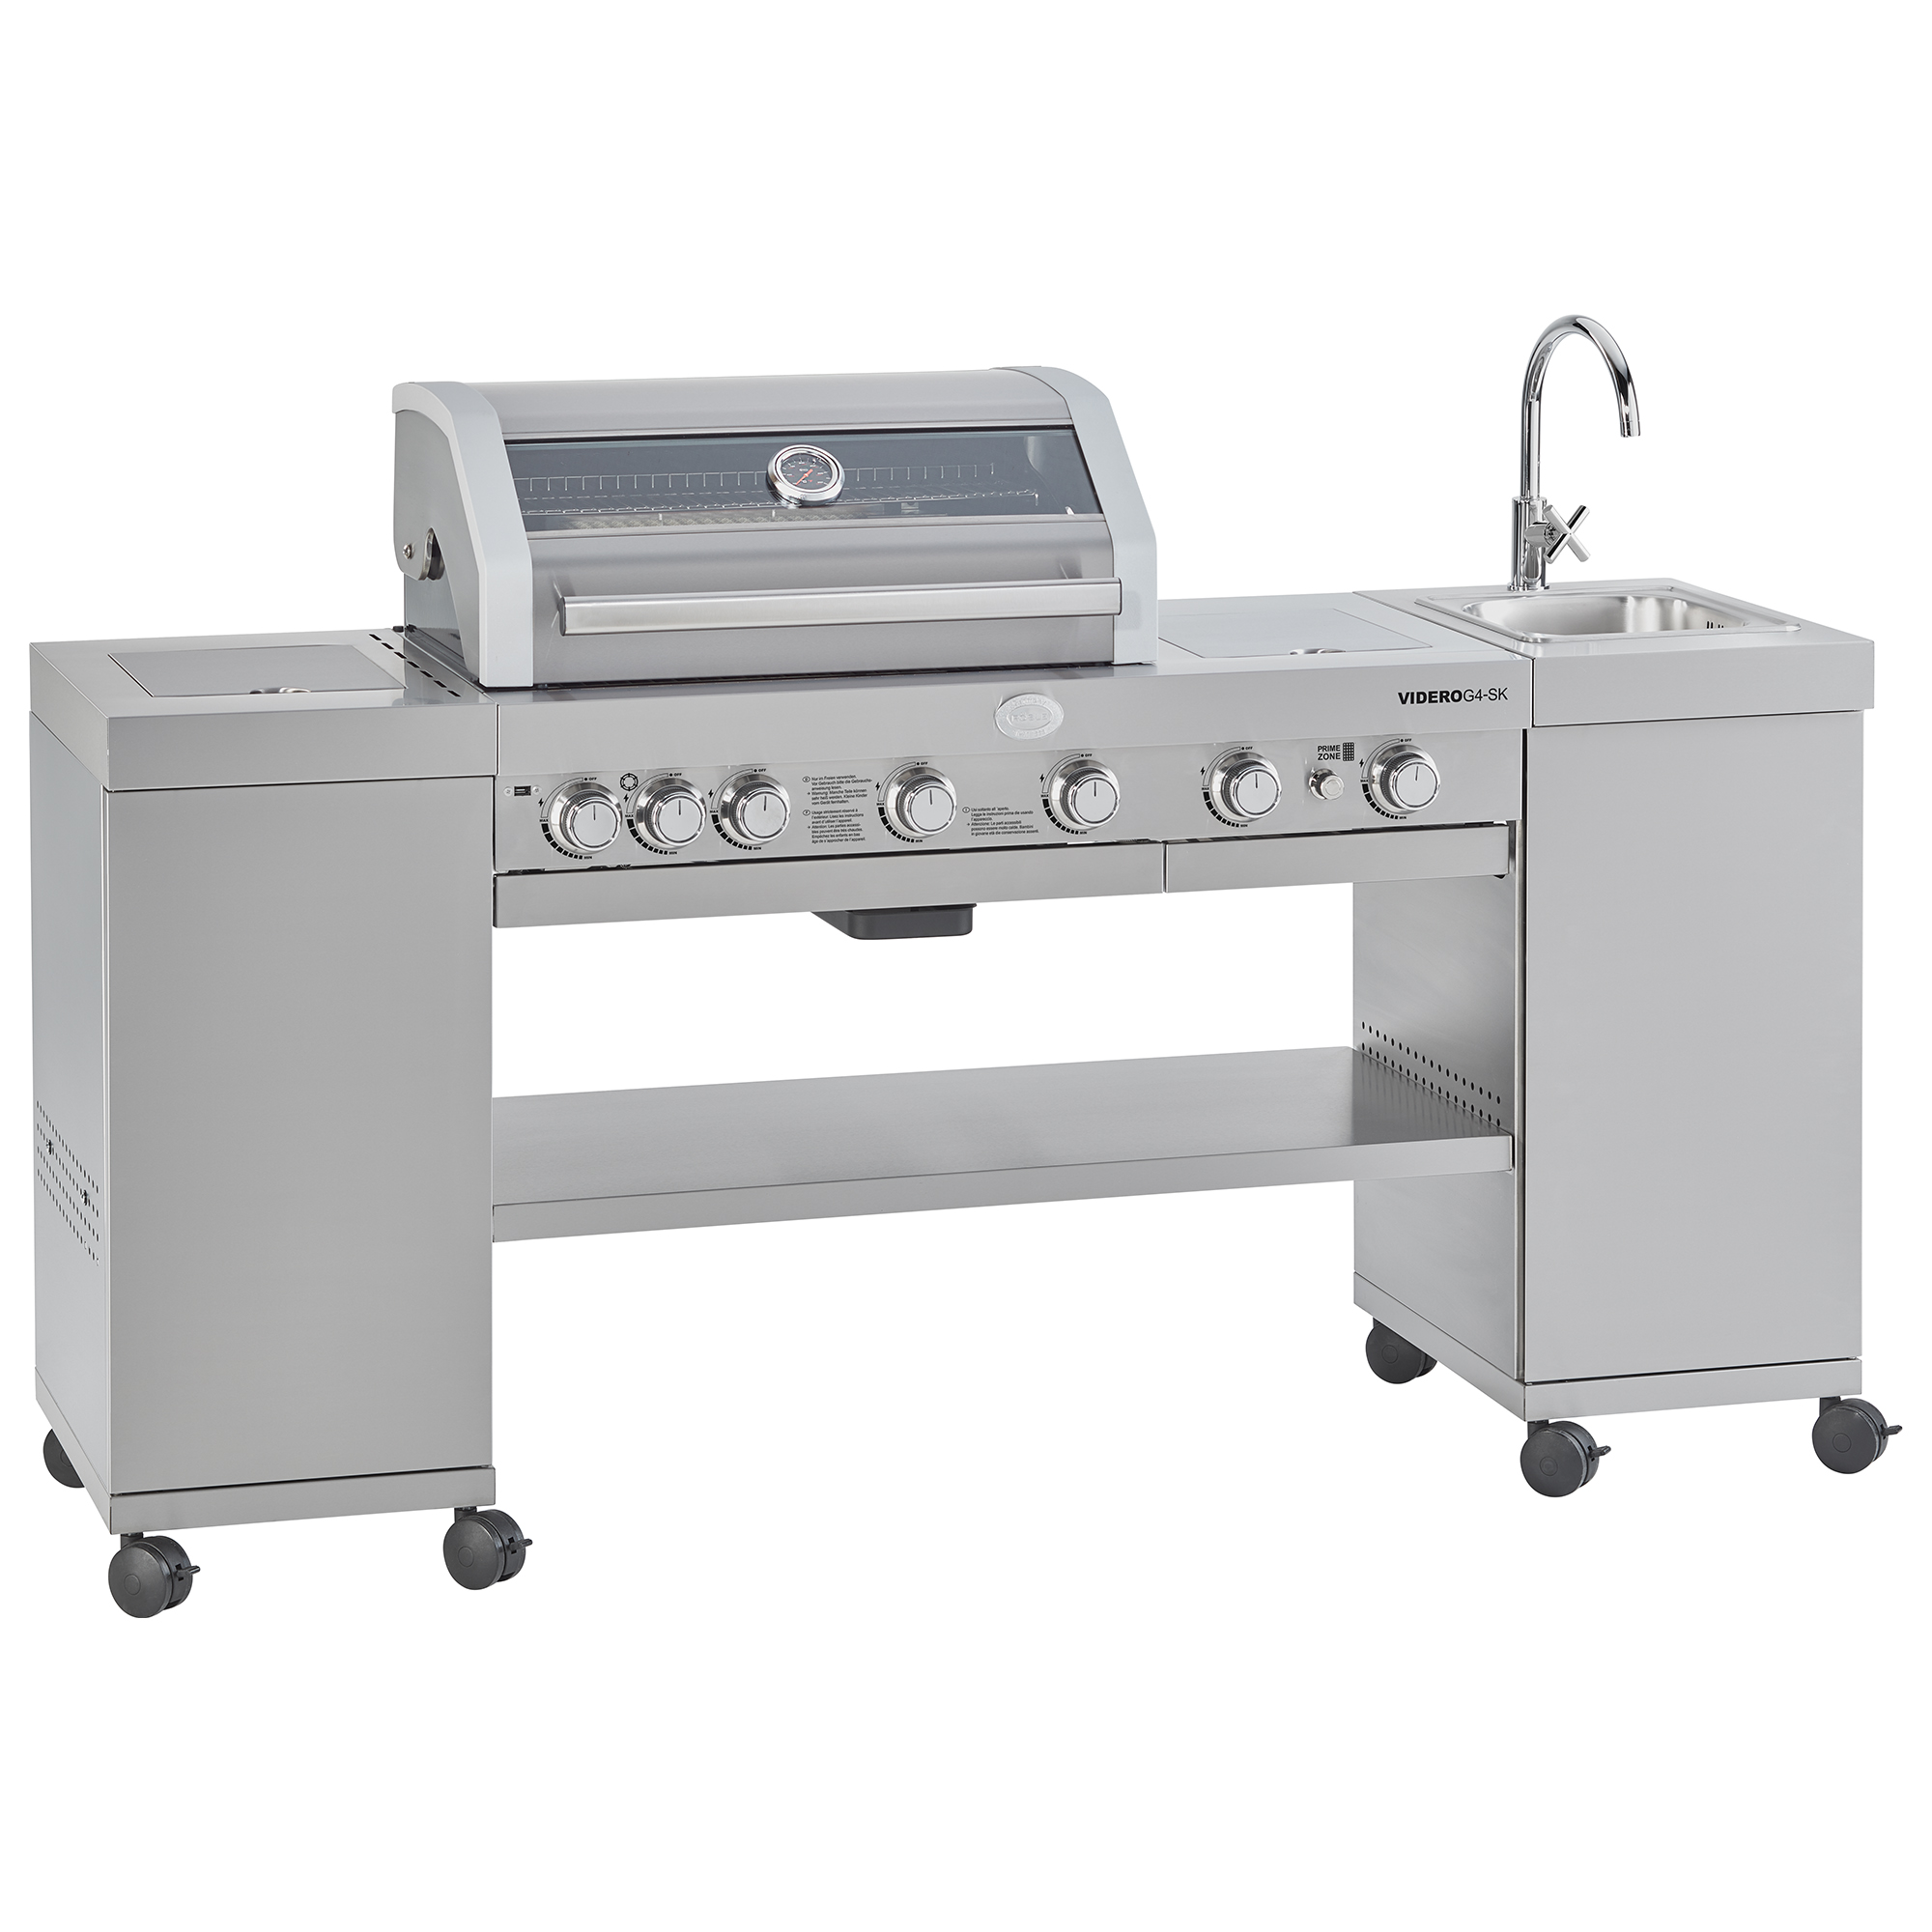 Gas grill BBQ-Kitchen VIDERO G4-SK Vario+ Stainless steel 50 mbar